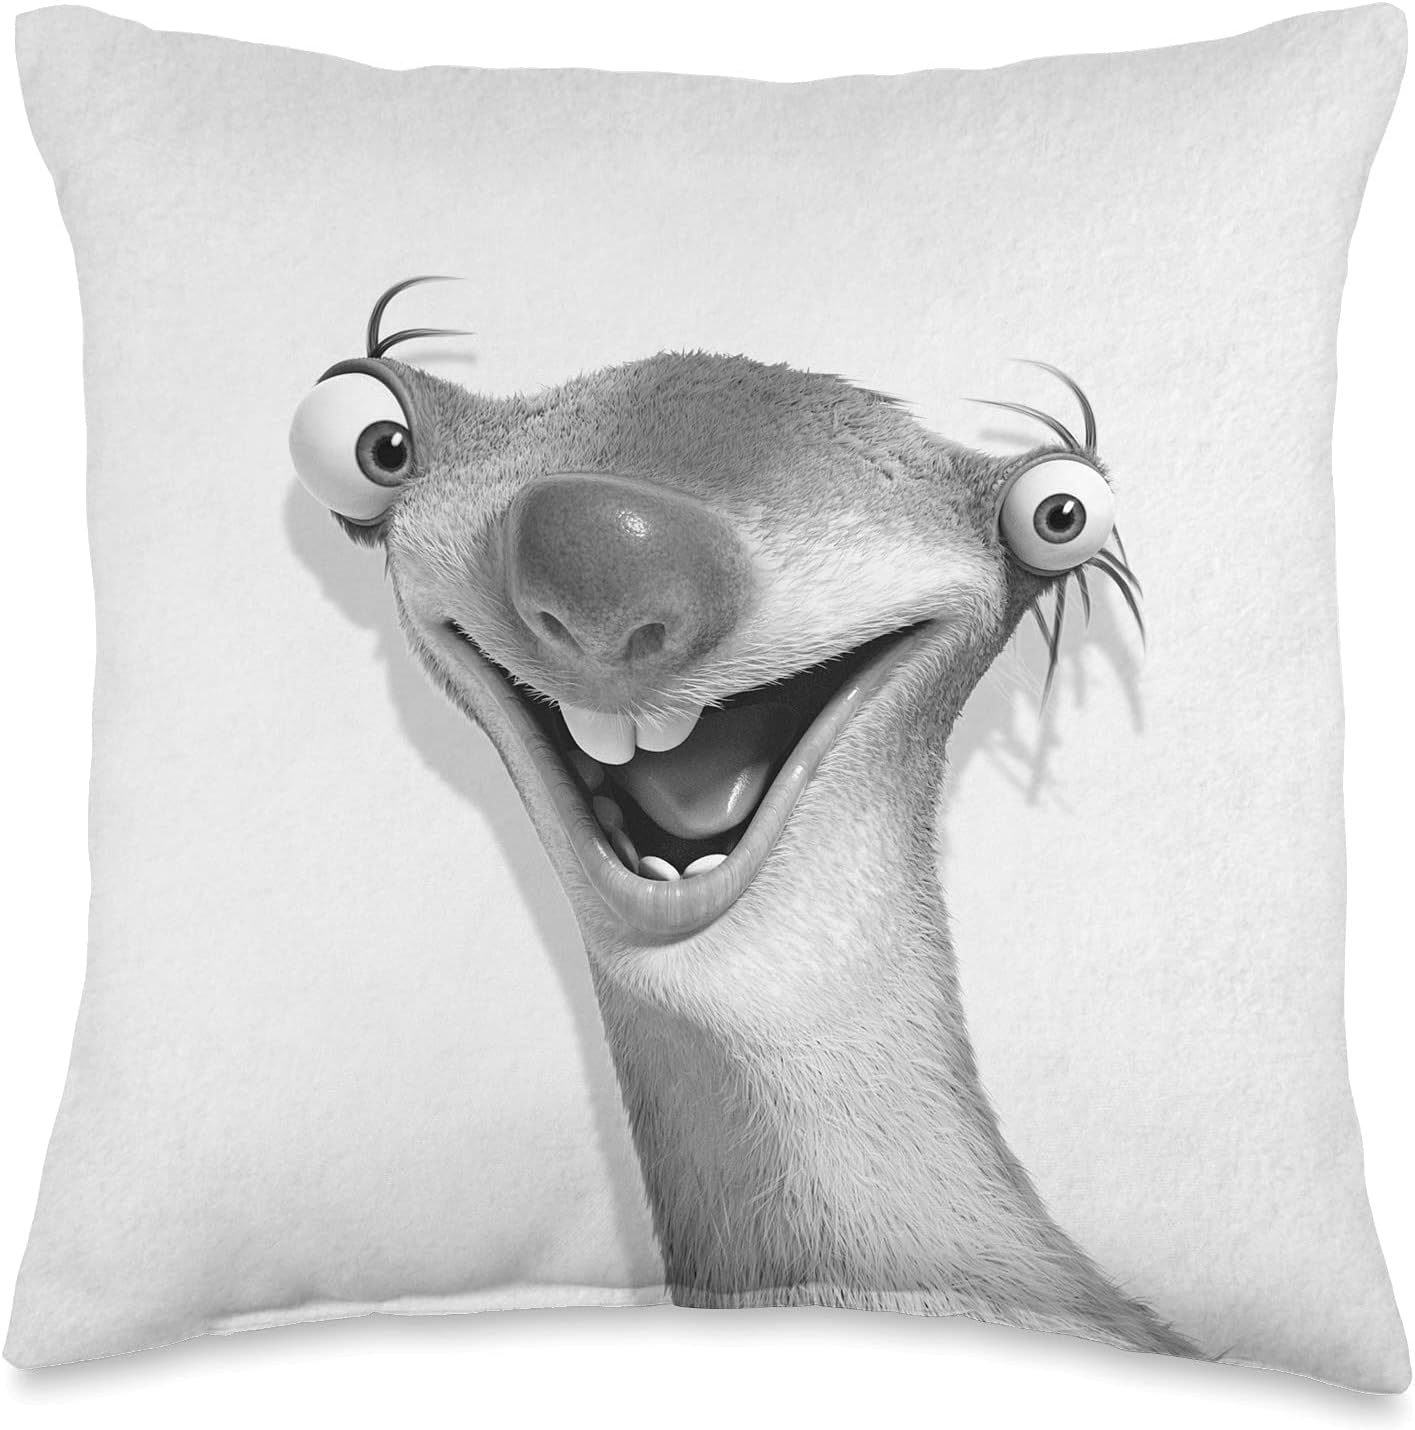 Sid the Sloth: The Comical Character from Ice Age